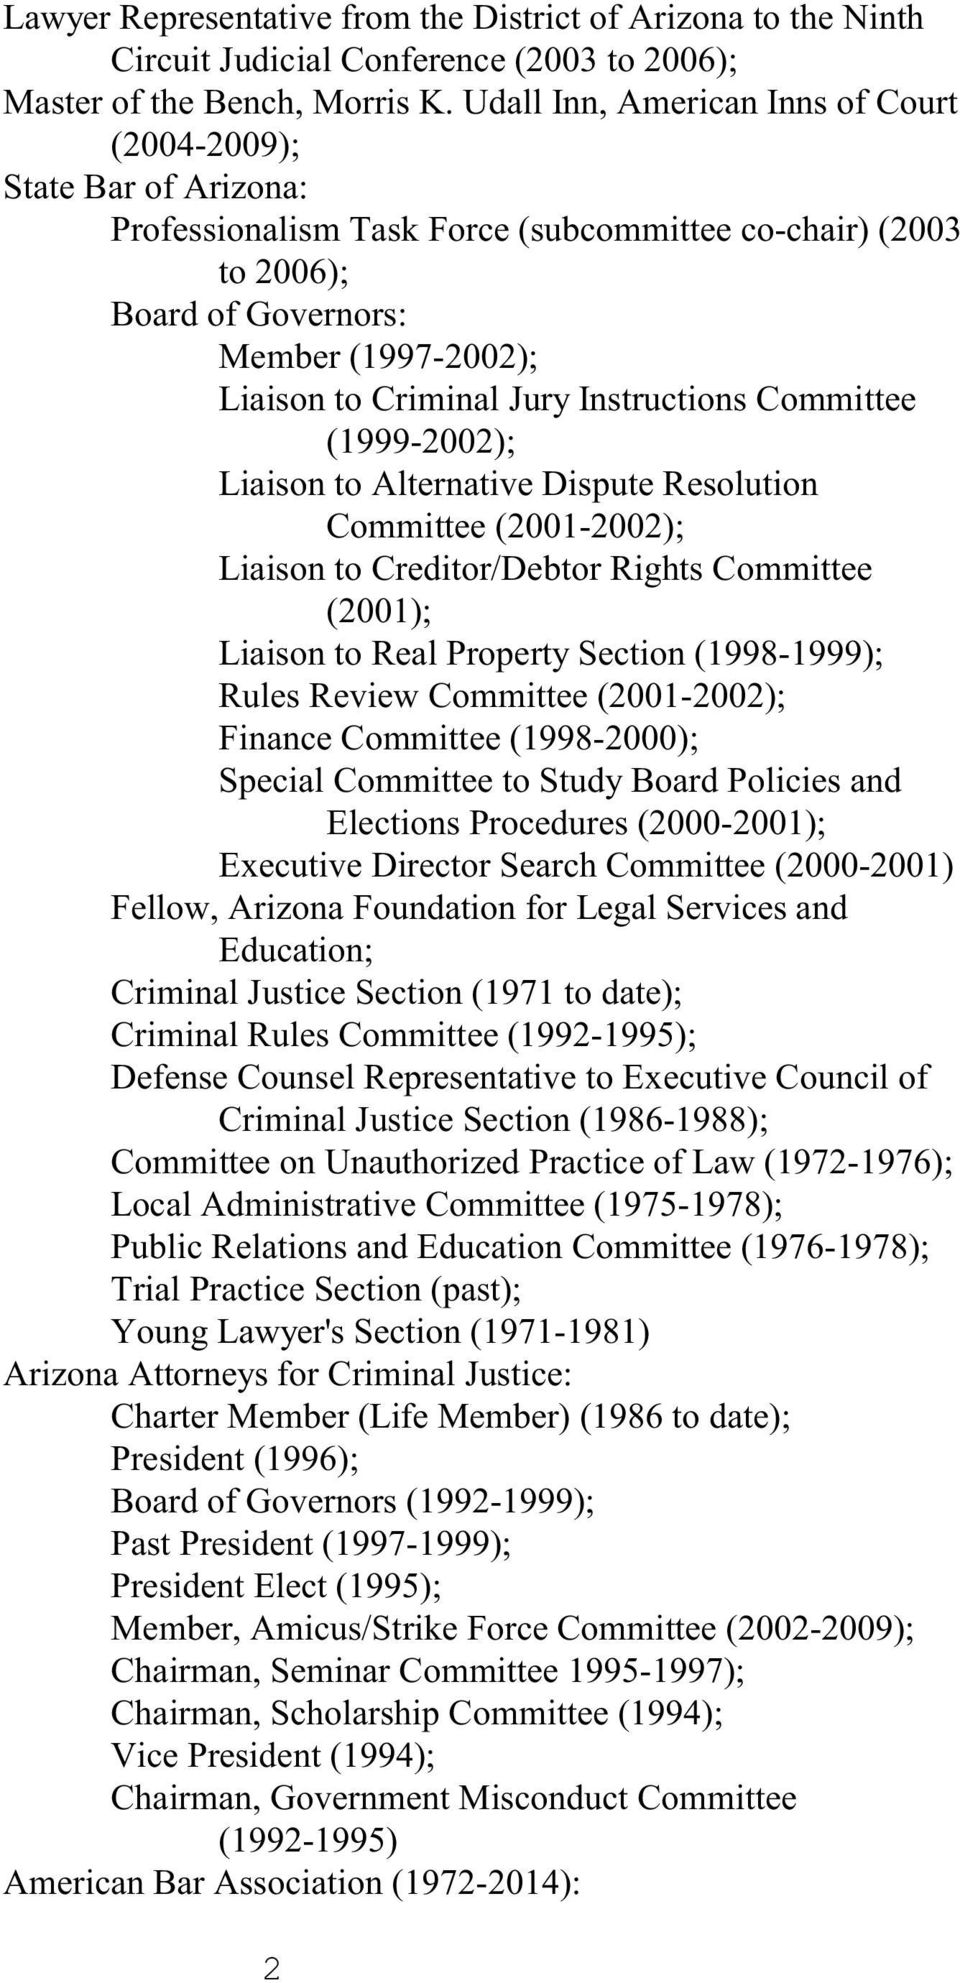 Jury Instructions Committee (1999-2002); Liaison to Alternative Dispute Resolution Committee (2001-2002); Liaison to Creditor/Debtor Rights Committee (2001); Liaison to Real Property Section